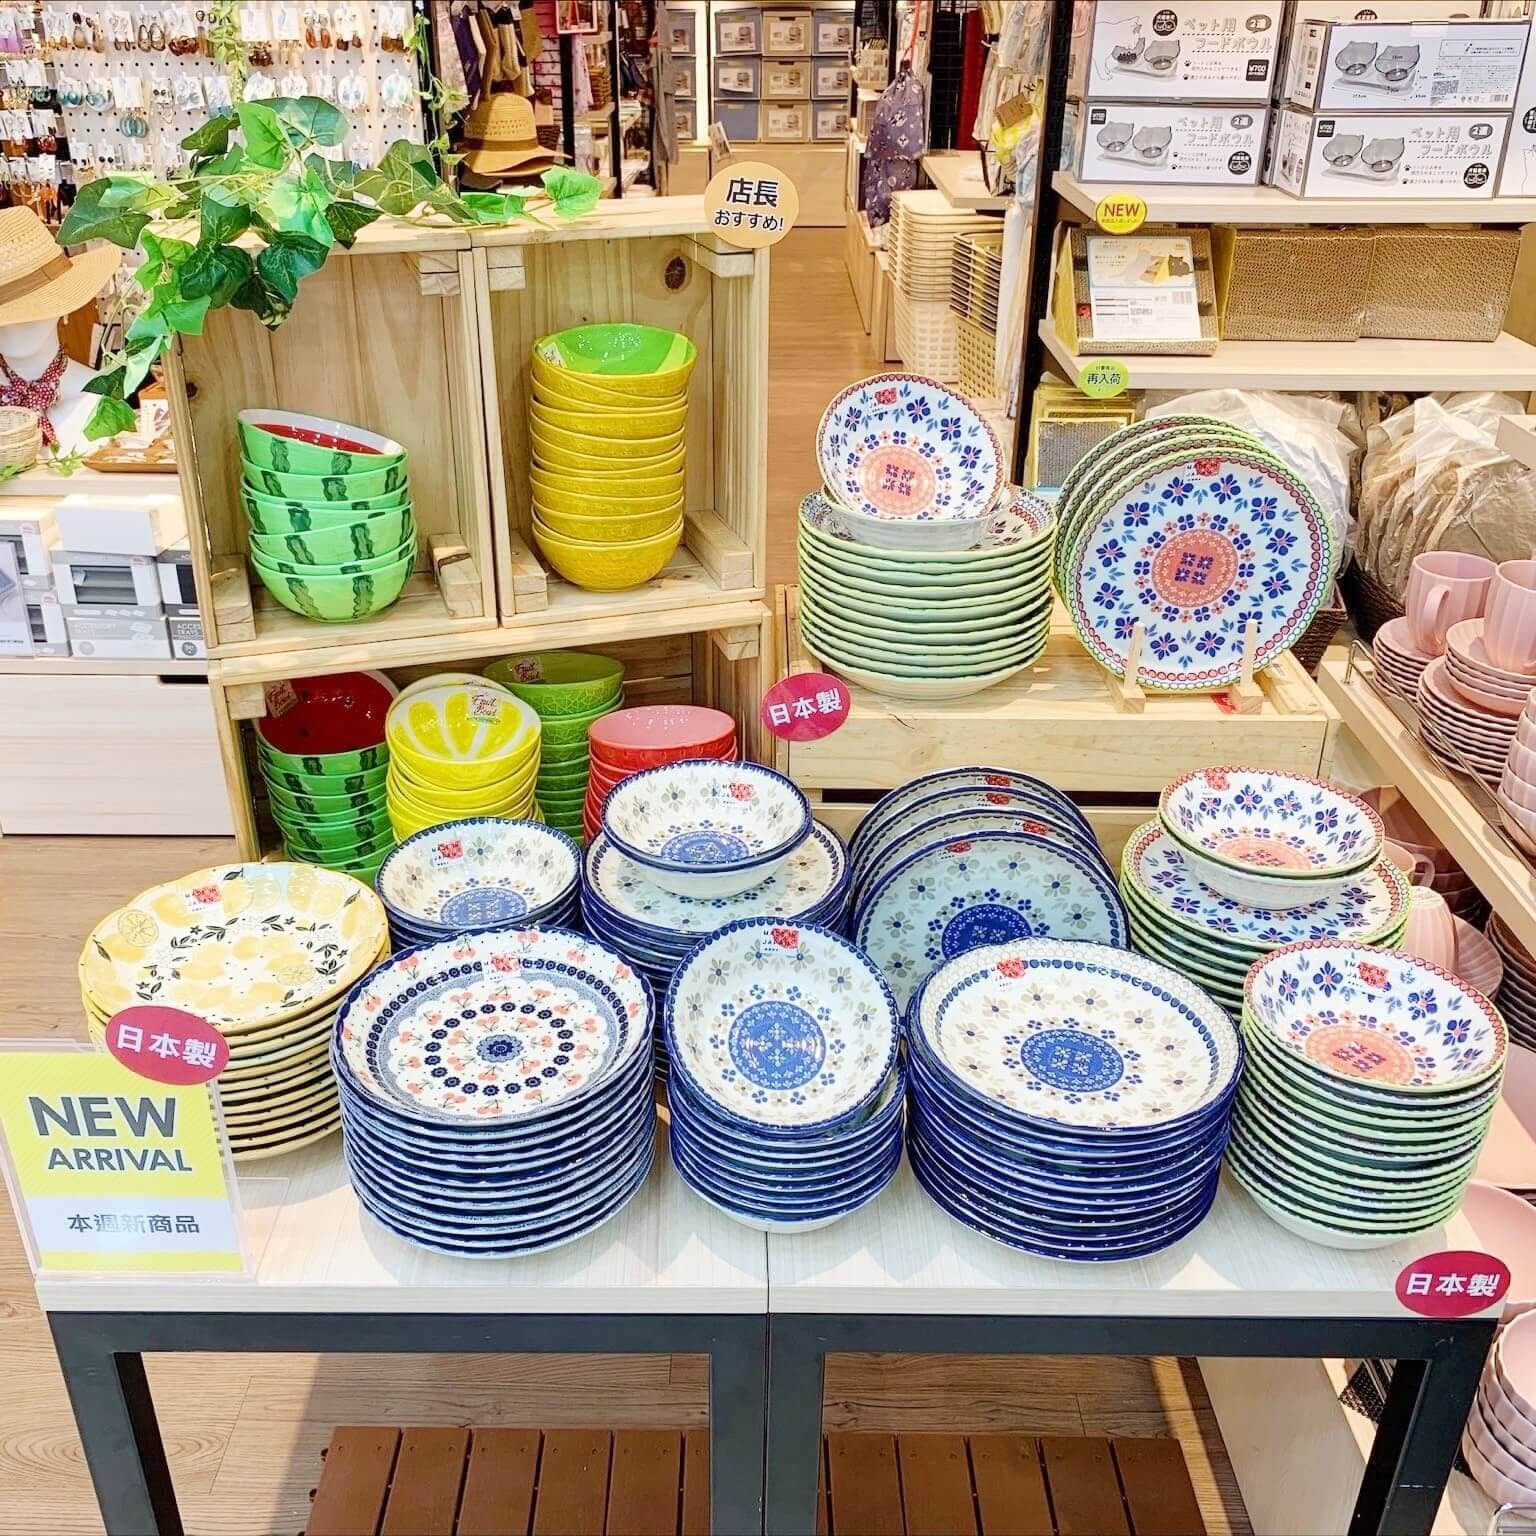 Daiso Japan - Never refuse a good deal – check off your shopping list at RM 5.90 for each item!